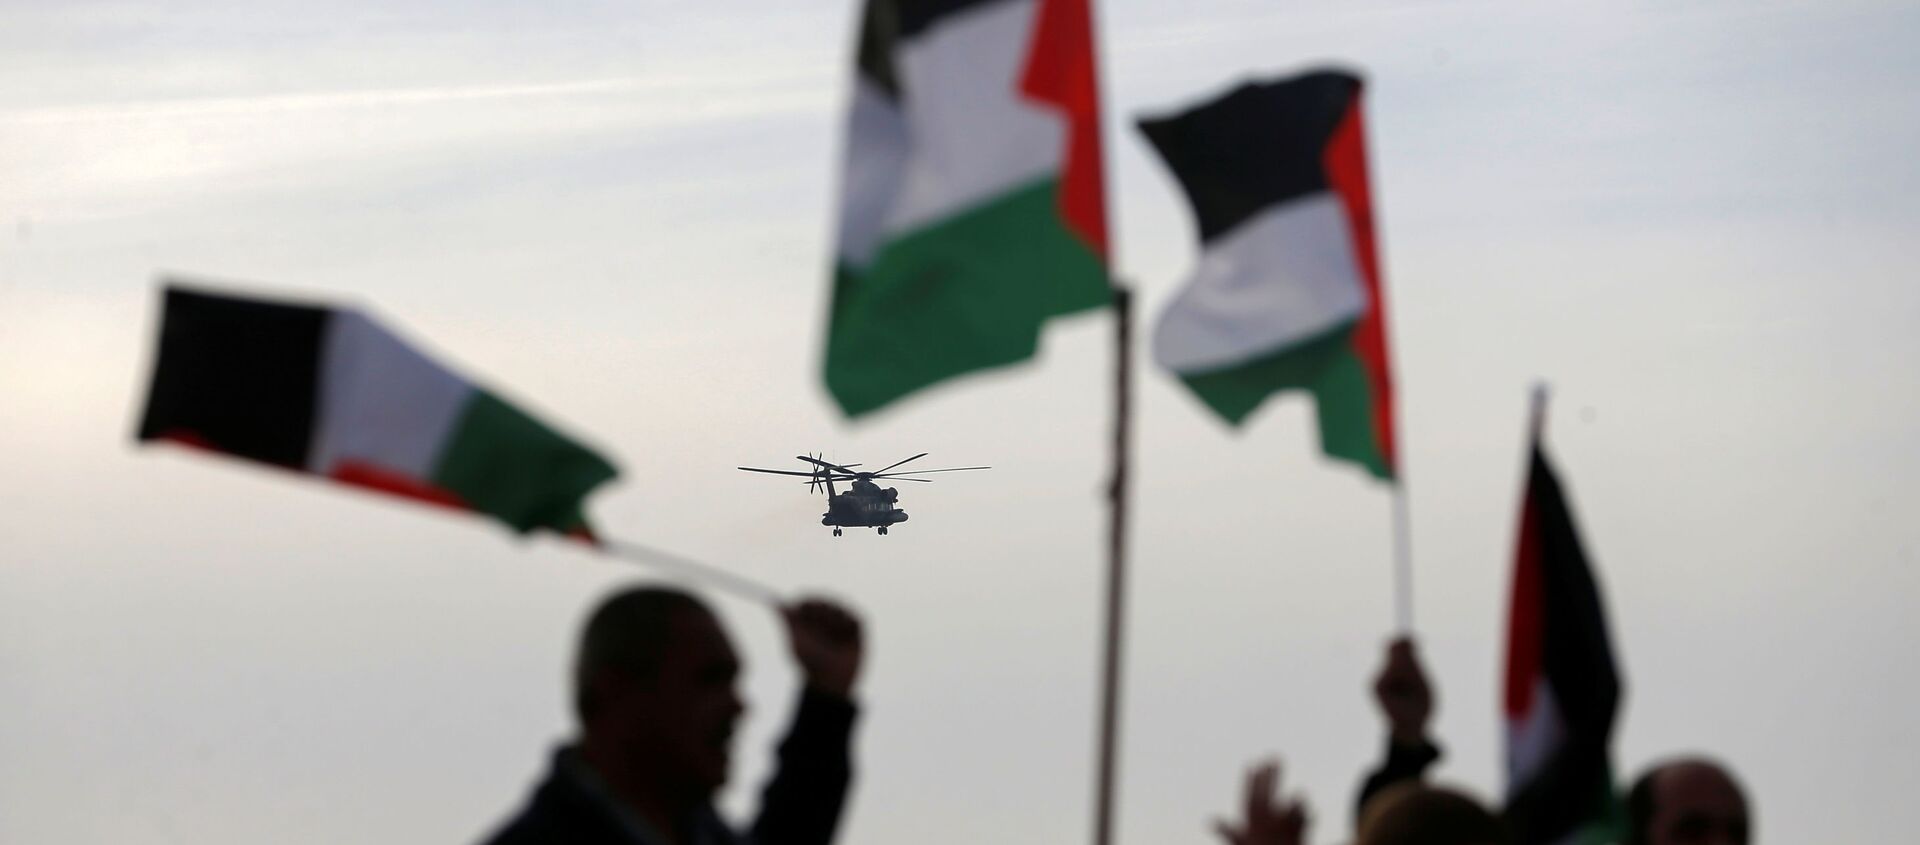 Demonstrators hold Palestinian flags as an aircraft carrying Israeli Prime Minister Benjamin approaches to land near the heritage site of ancient Susya, during a protest against Netanyahu's visit to the site, in Susya village in the Israeli-occupied West Bank March 14, 2021.  - Sputnik International, 1920, 21.05.2021